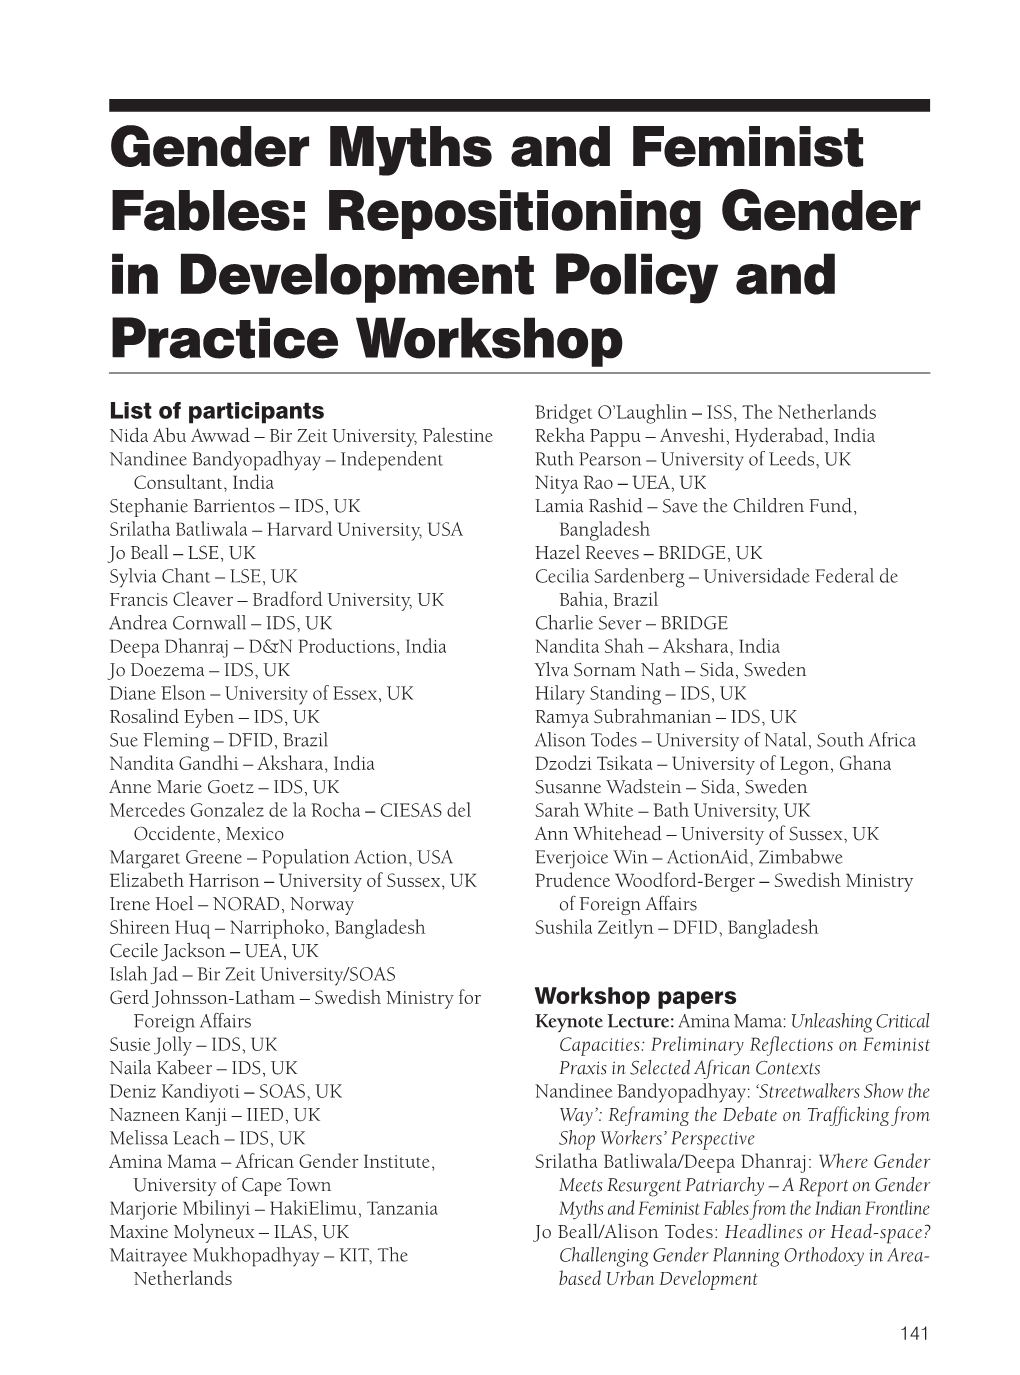 Gender Myths and Feminist Fables: Repositioning Gender in Development Policy and Practice Workshop